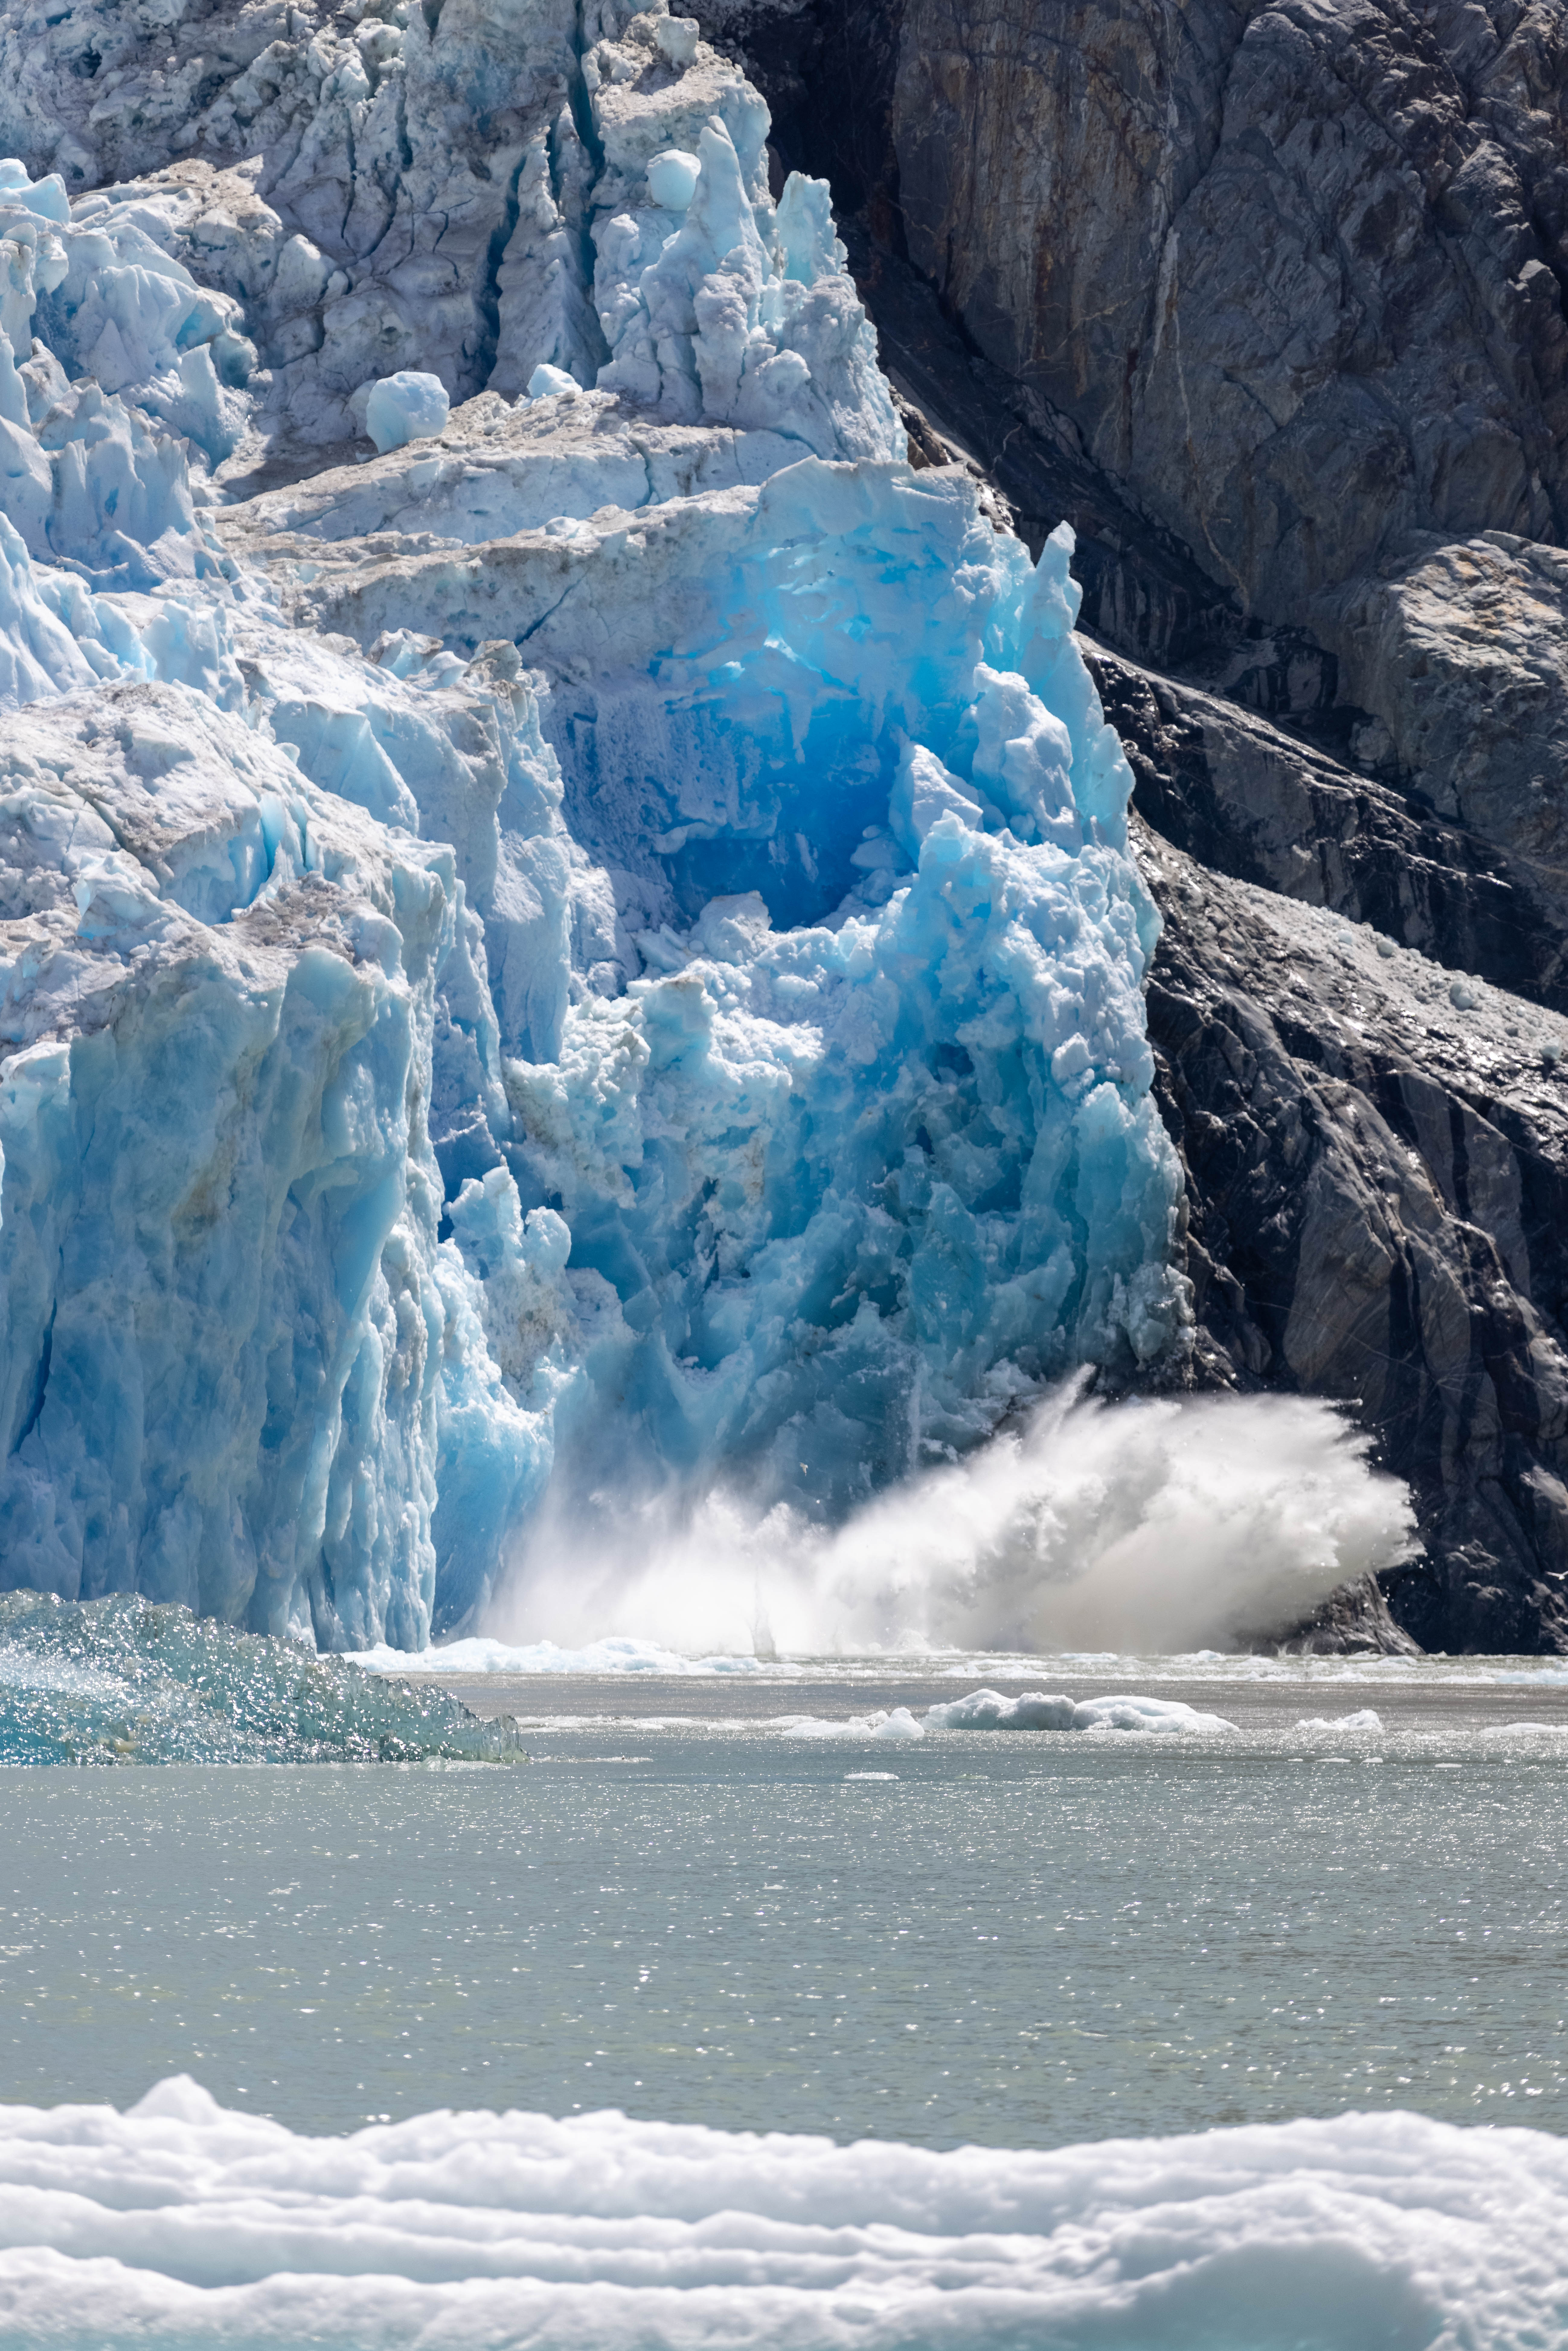 Water splashes as the Sawyer Glacier calves in Tracy Arm fjord